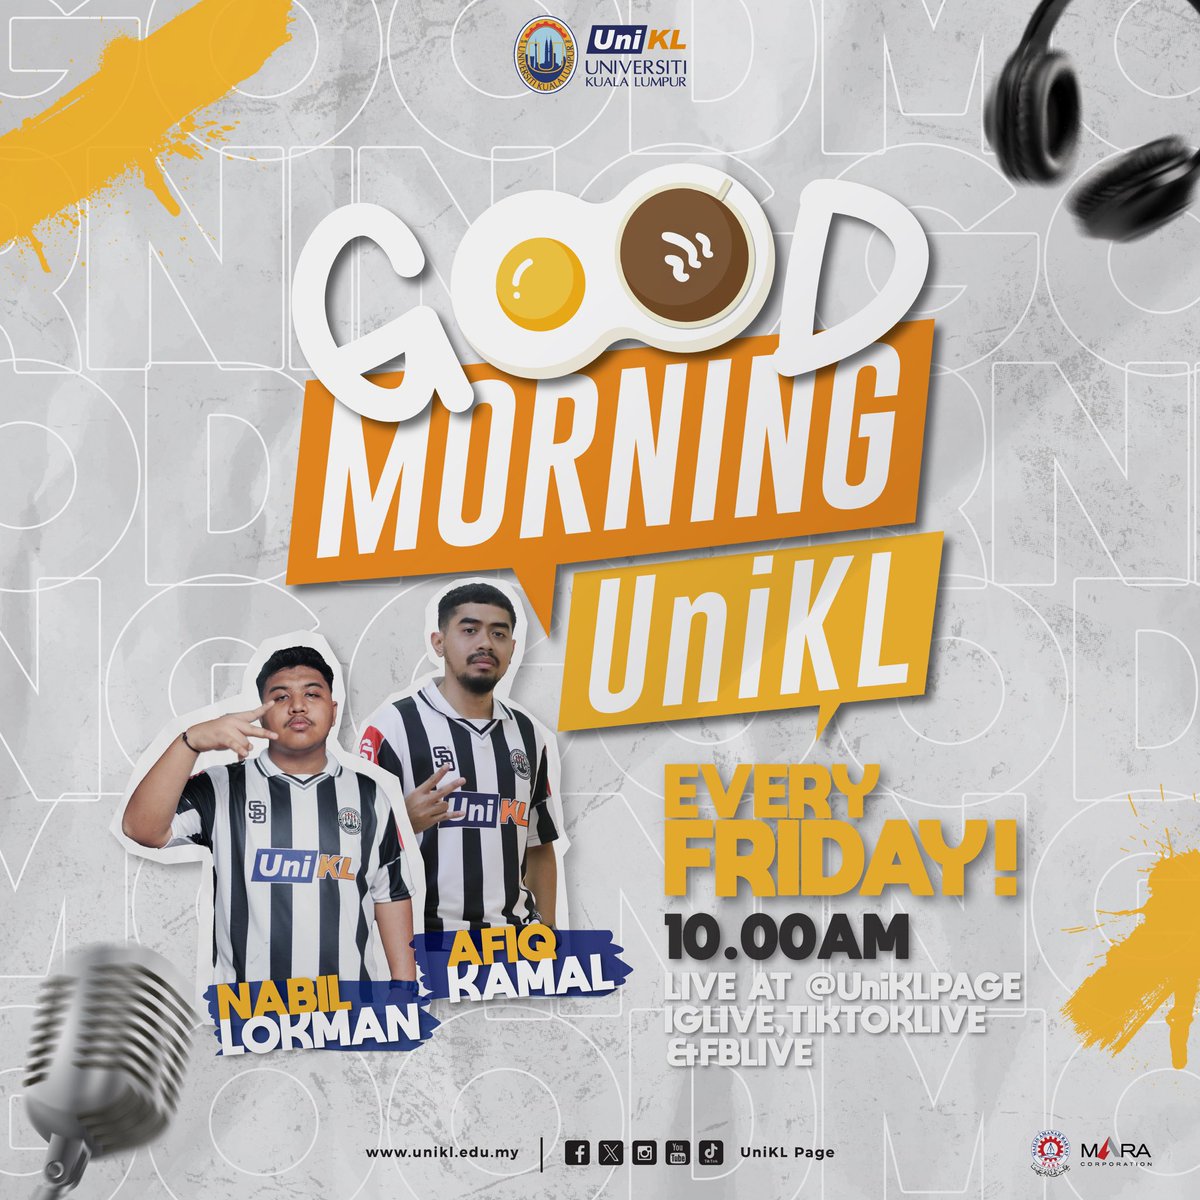 Hey, bright and early risers! 🌞 Welcome back to another exciting edition of Good Morning UniKL! Get ready to kickstart your day with a cup of coffee and join us for a whirlwind tour of this week's most sizzling news! 😎 We've got a whirlwind of updates: Pedophilia cases,…